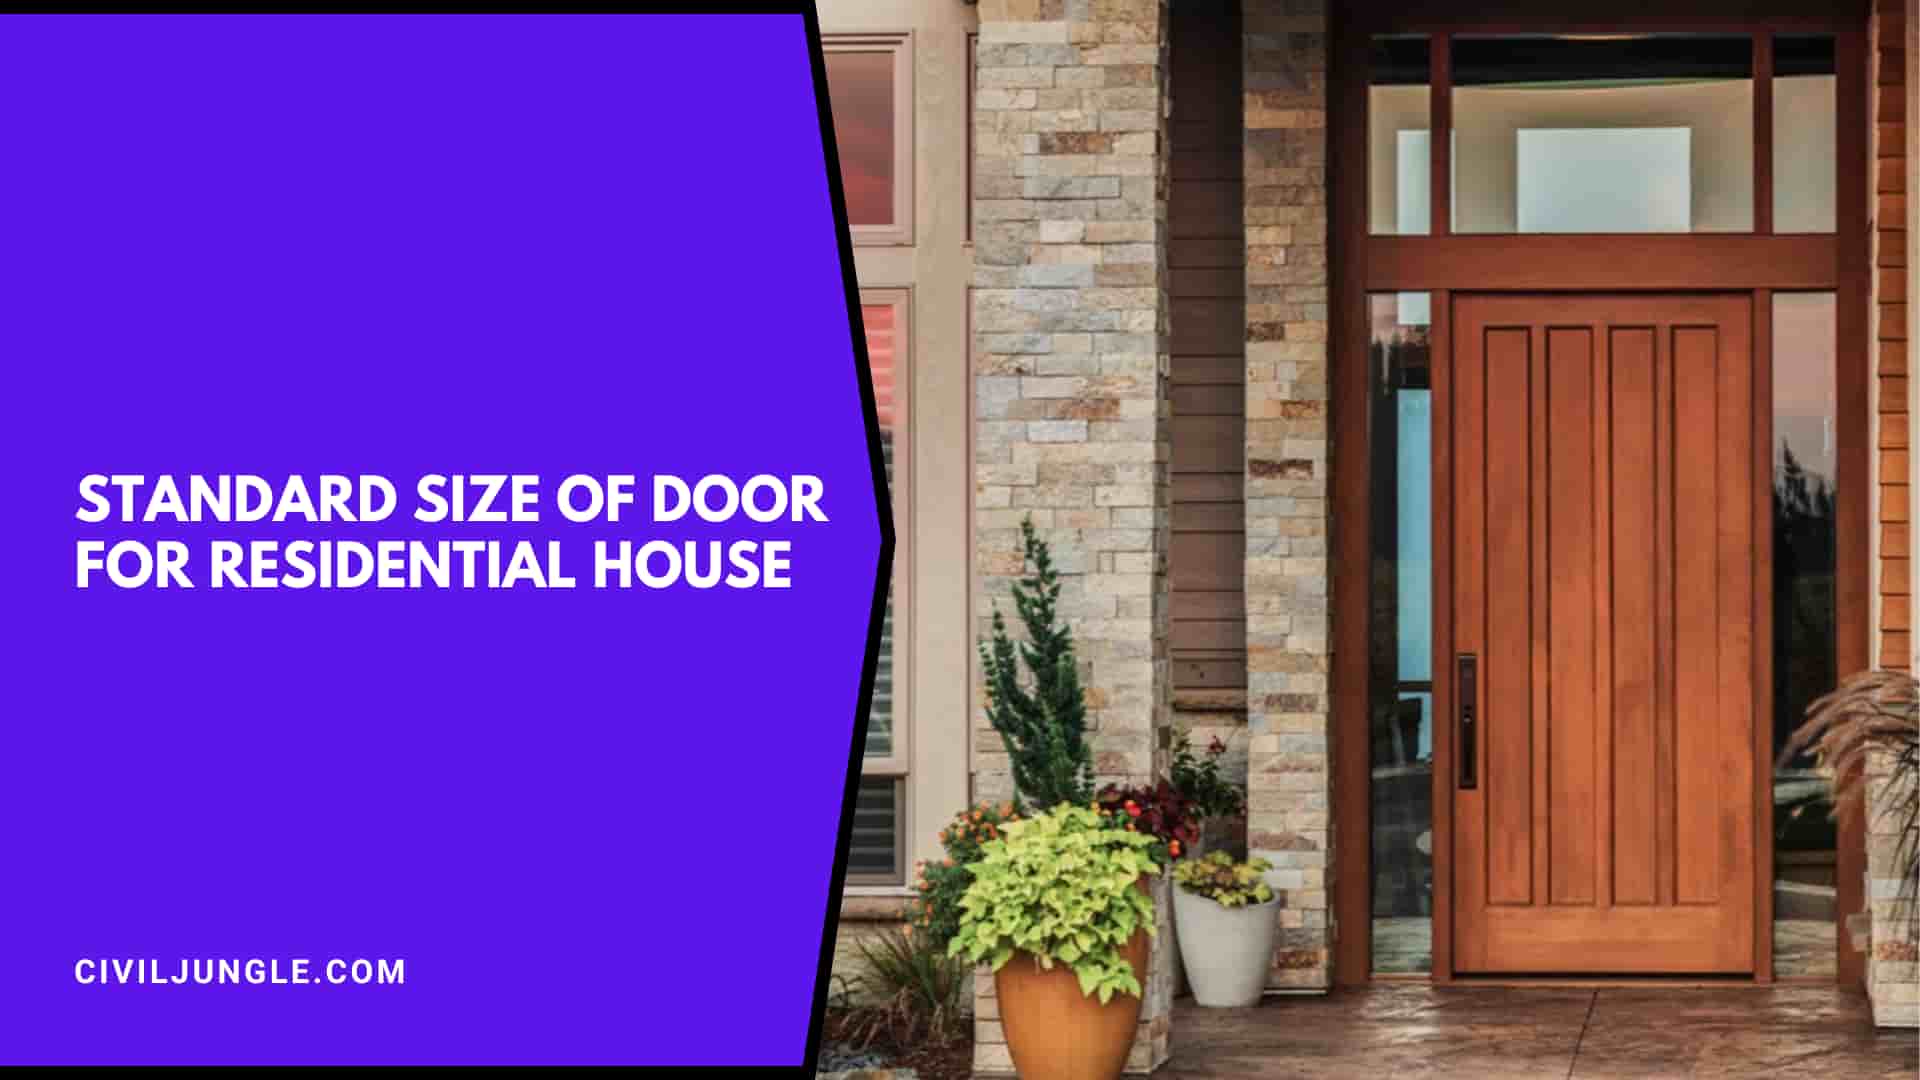 Standard Size of Door for Residential House